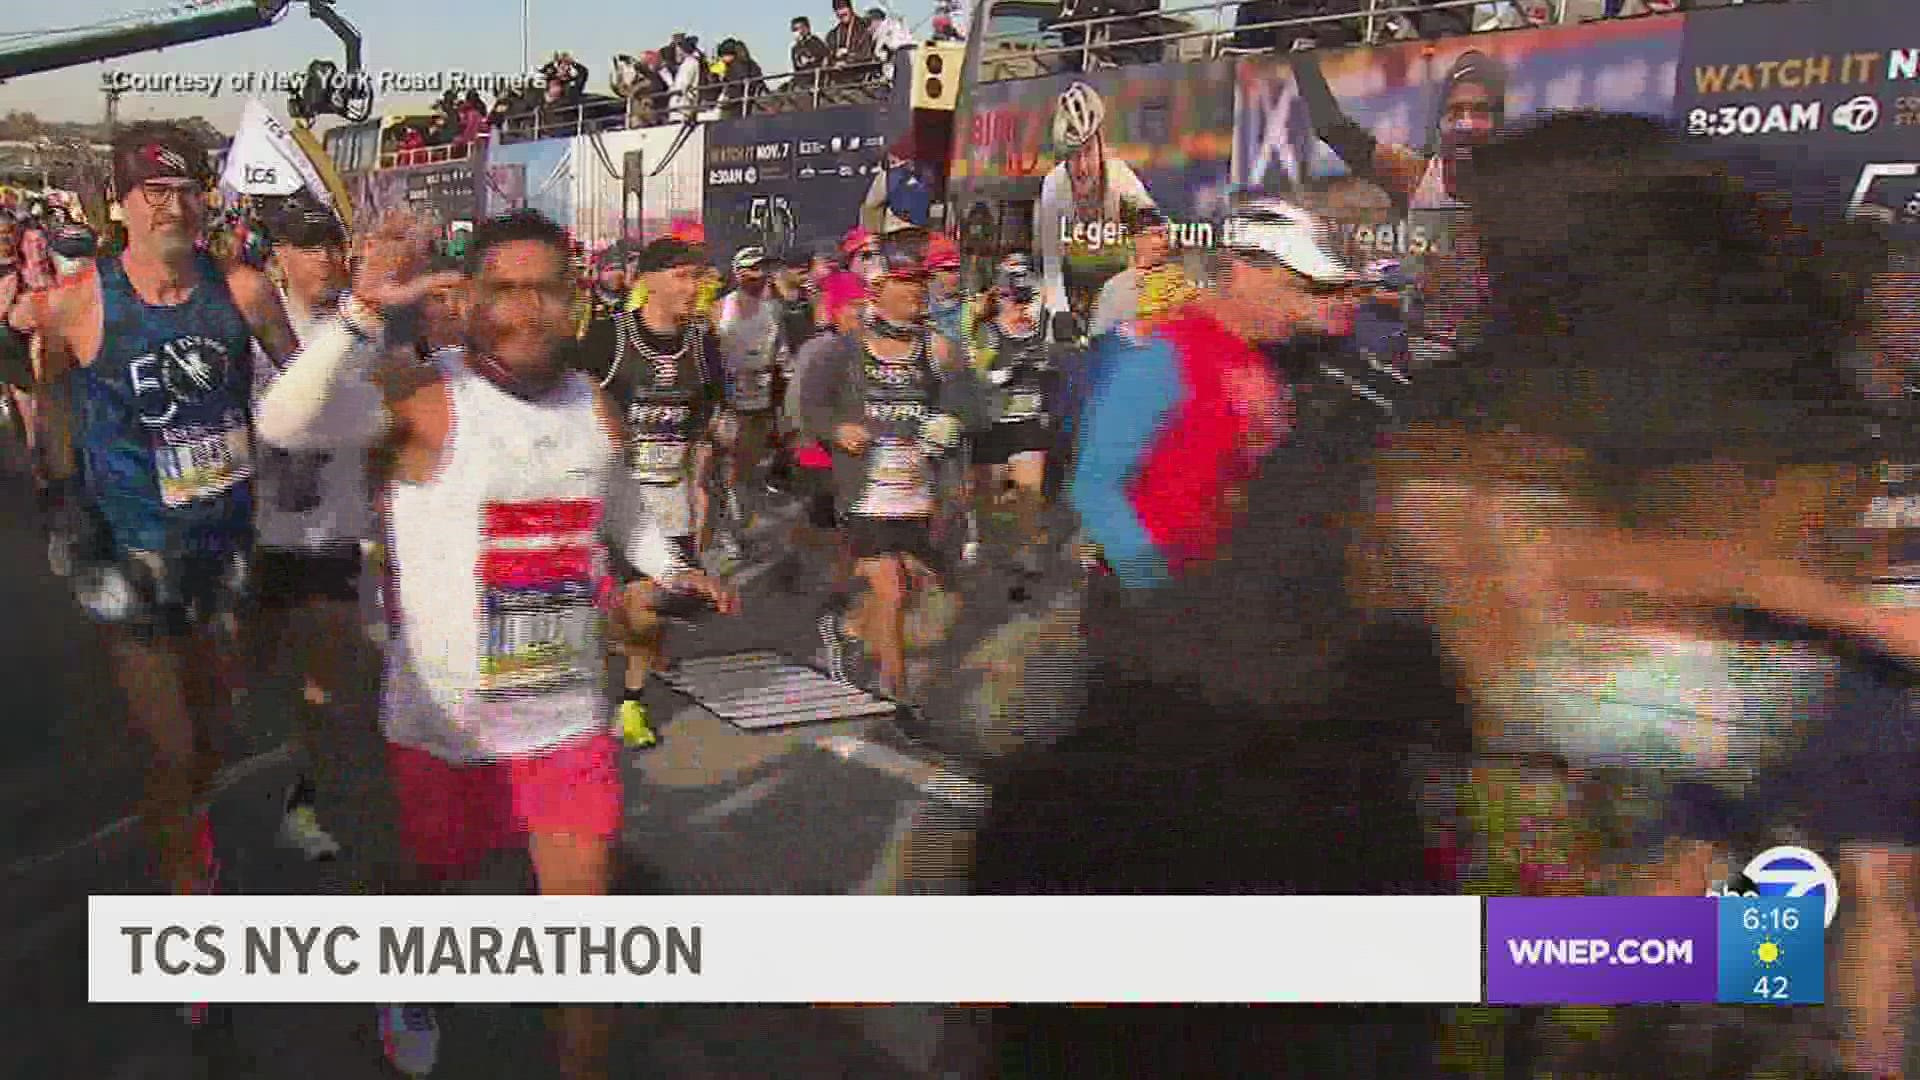 The Marathon was downsized due to the pandemic - about 30,000 people participated.